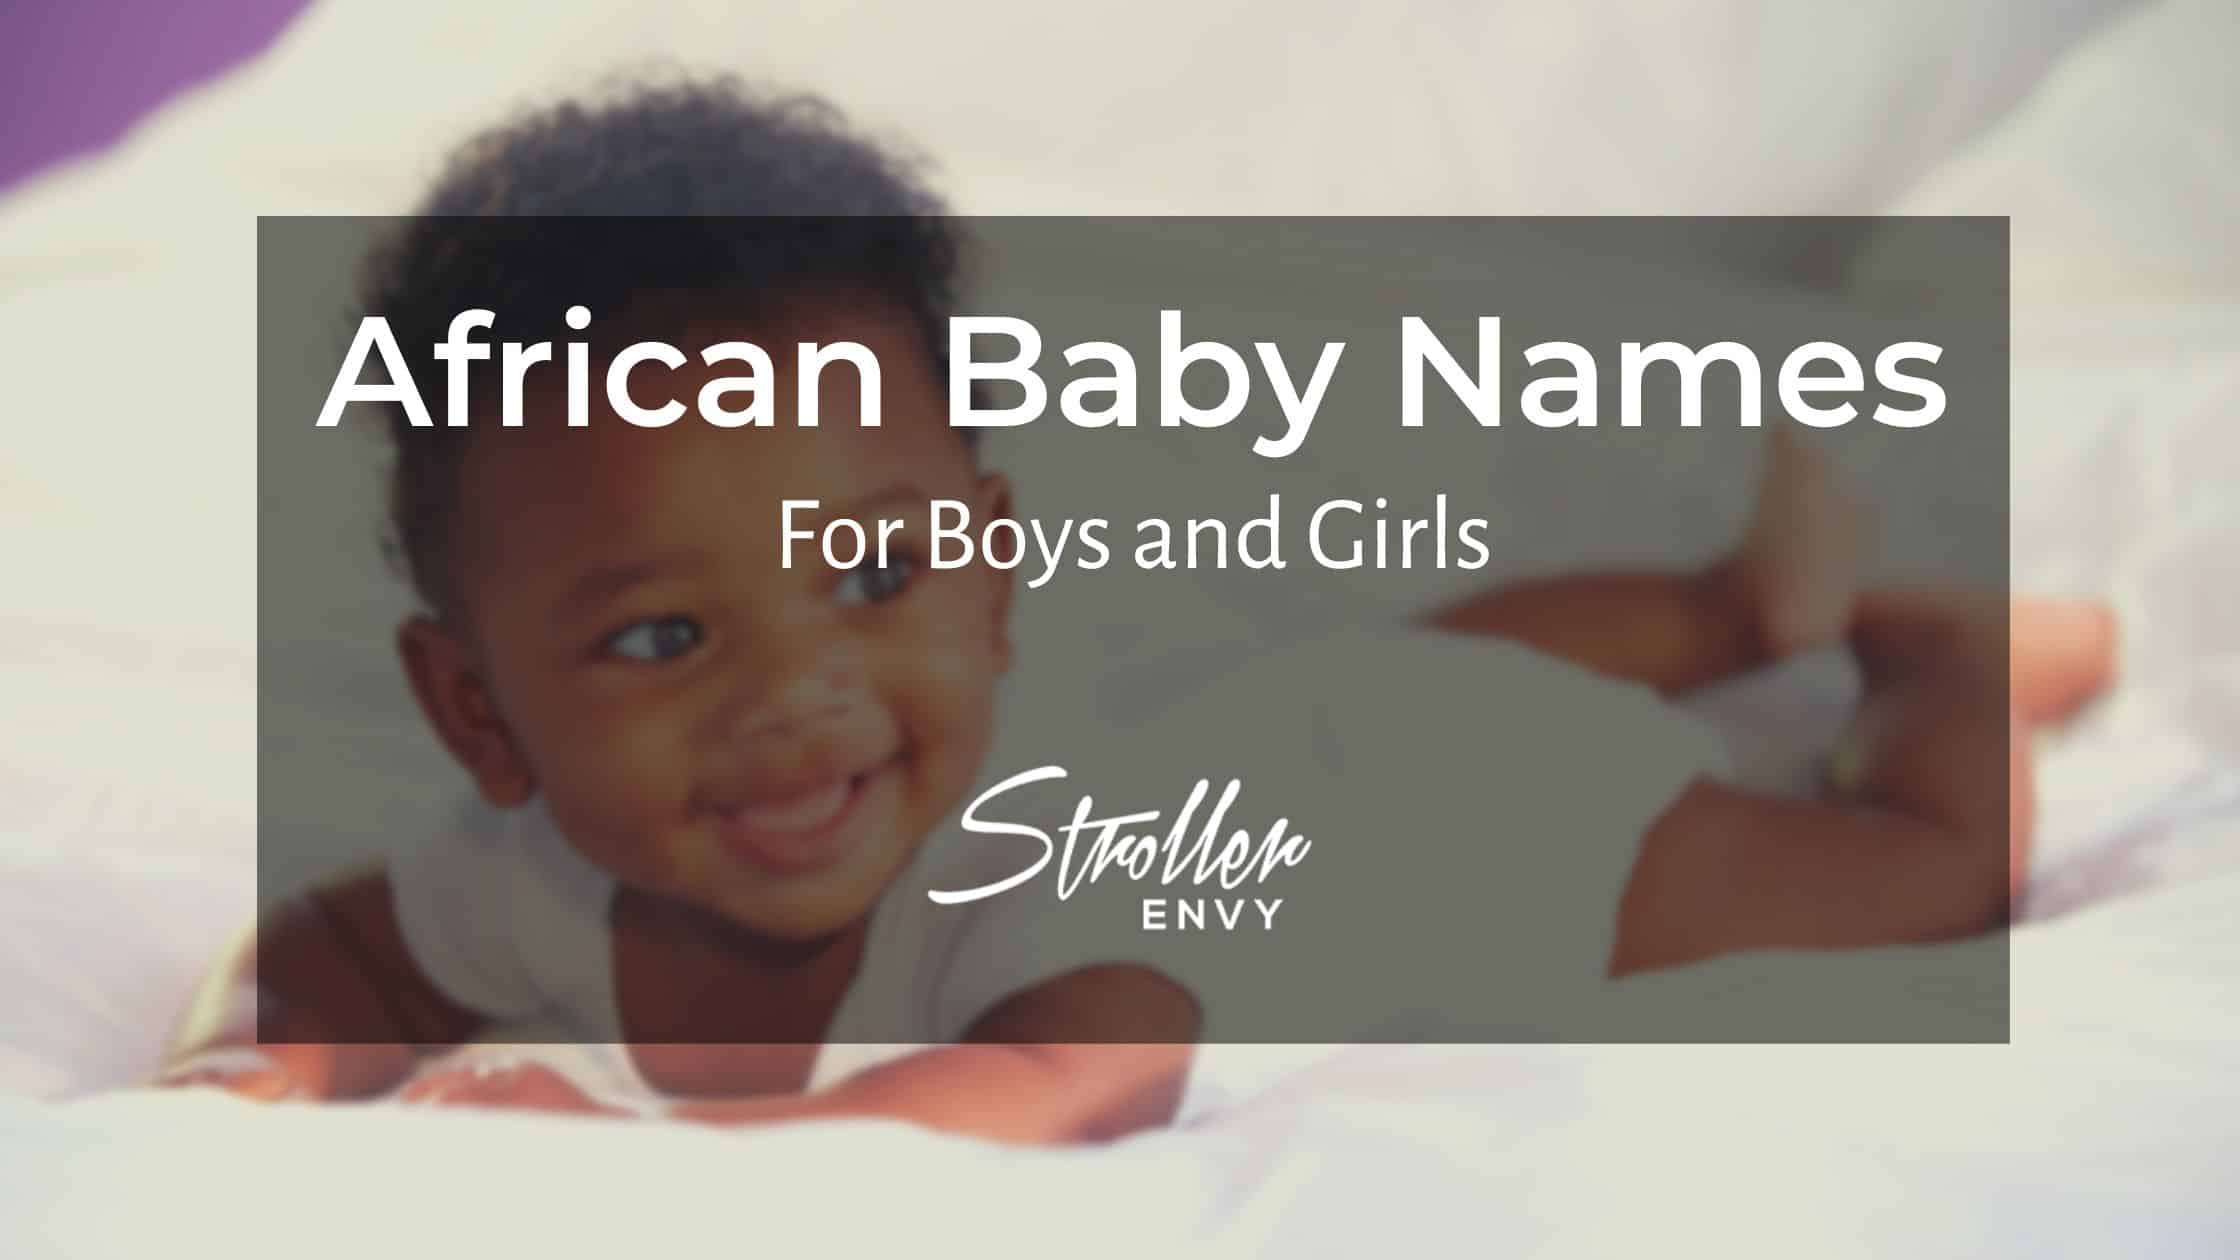 African baby names